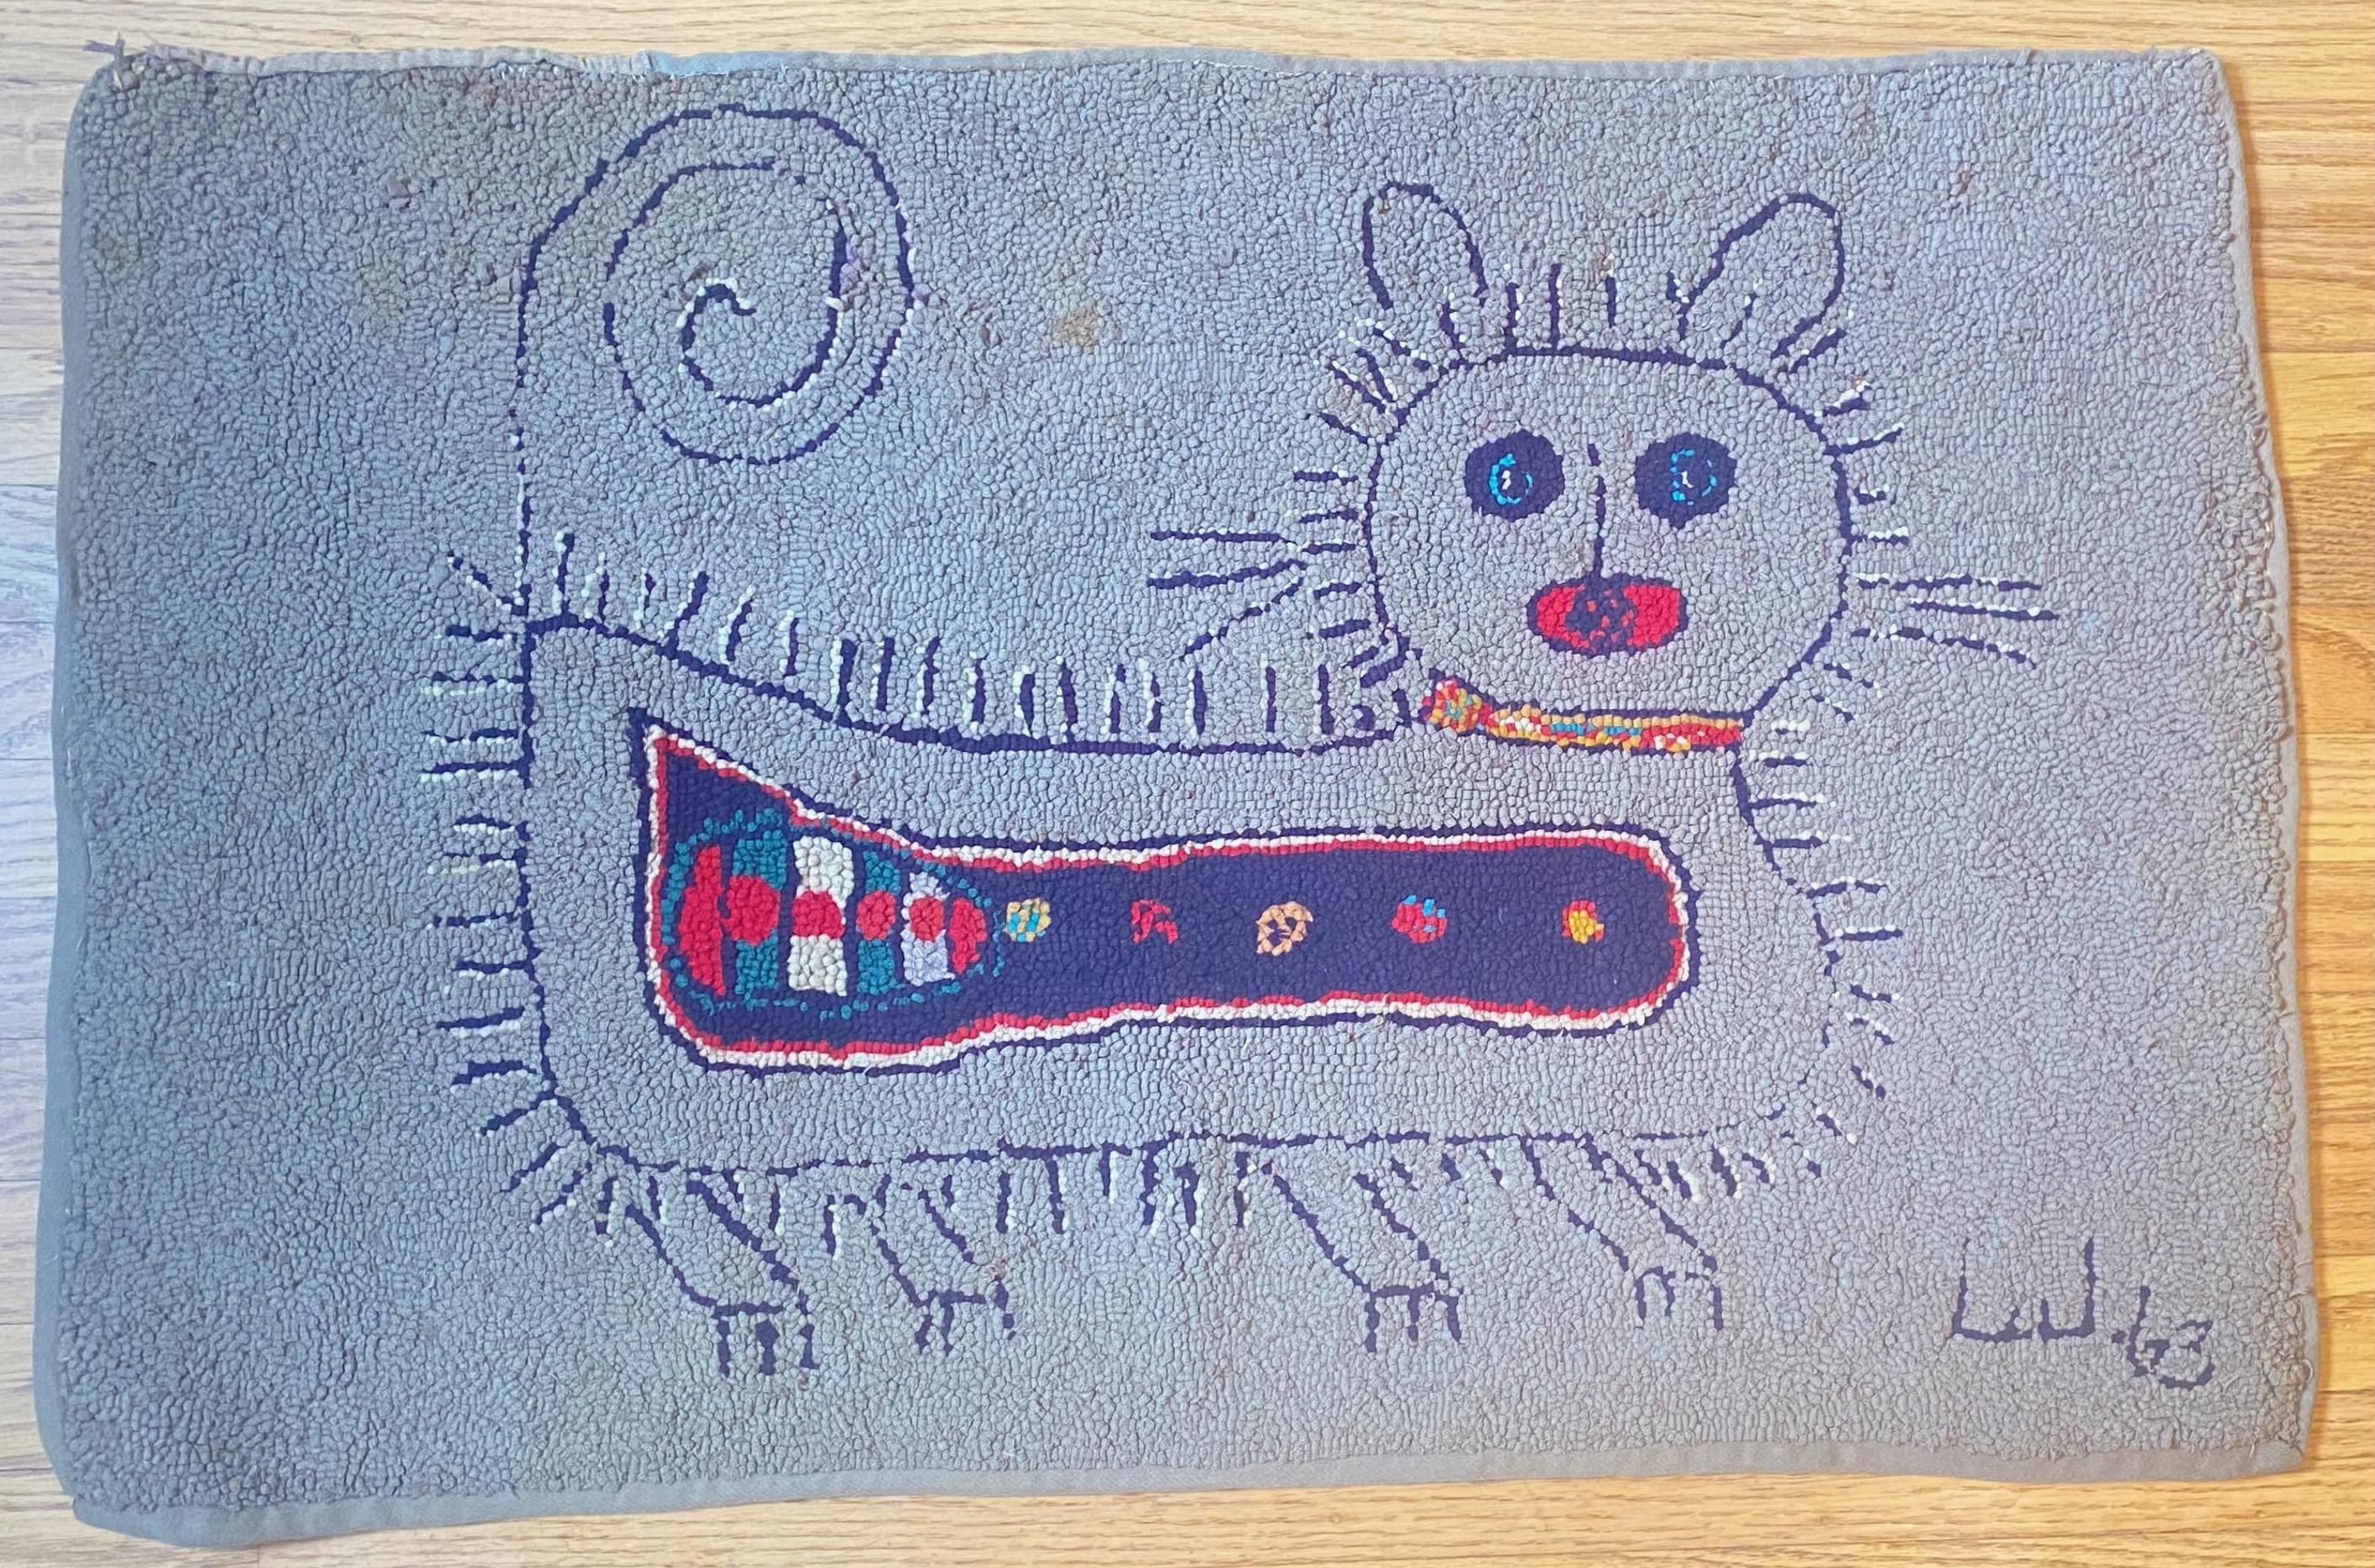 Perfectly charming Folk Art small wool rug or wall hanging of a modernist style cat.
There is some minor staining, and a few lose loops and minor repair on edges.
Signed and dated '63.
American  